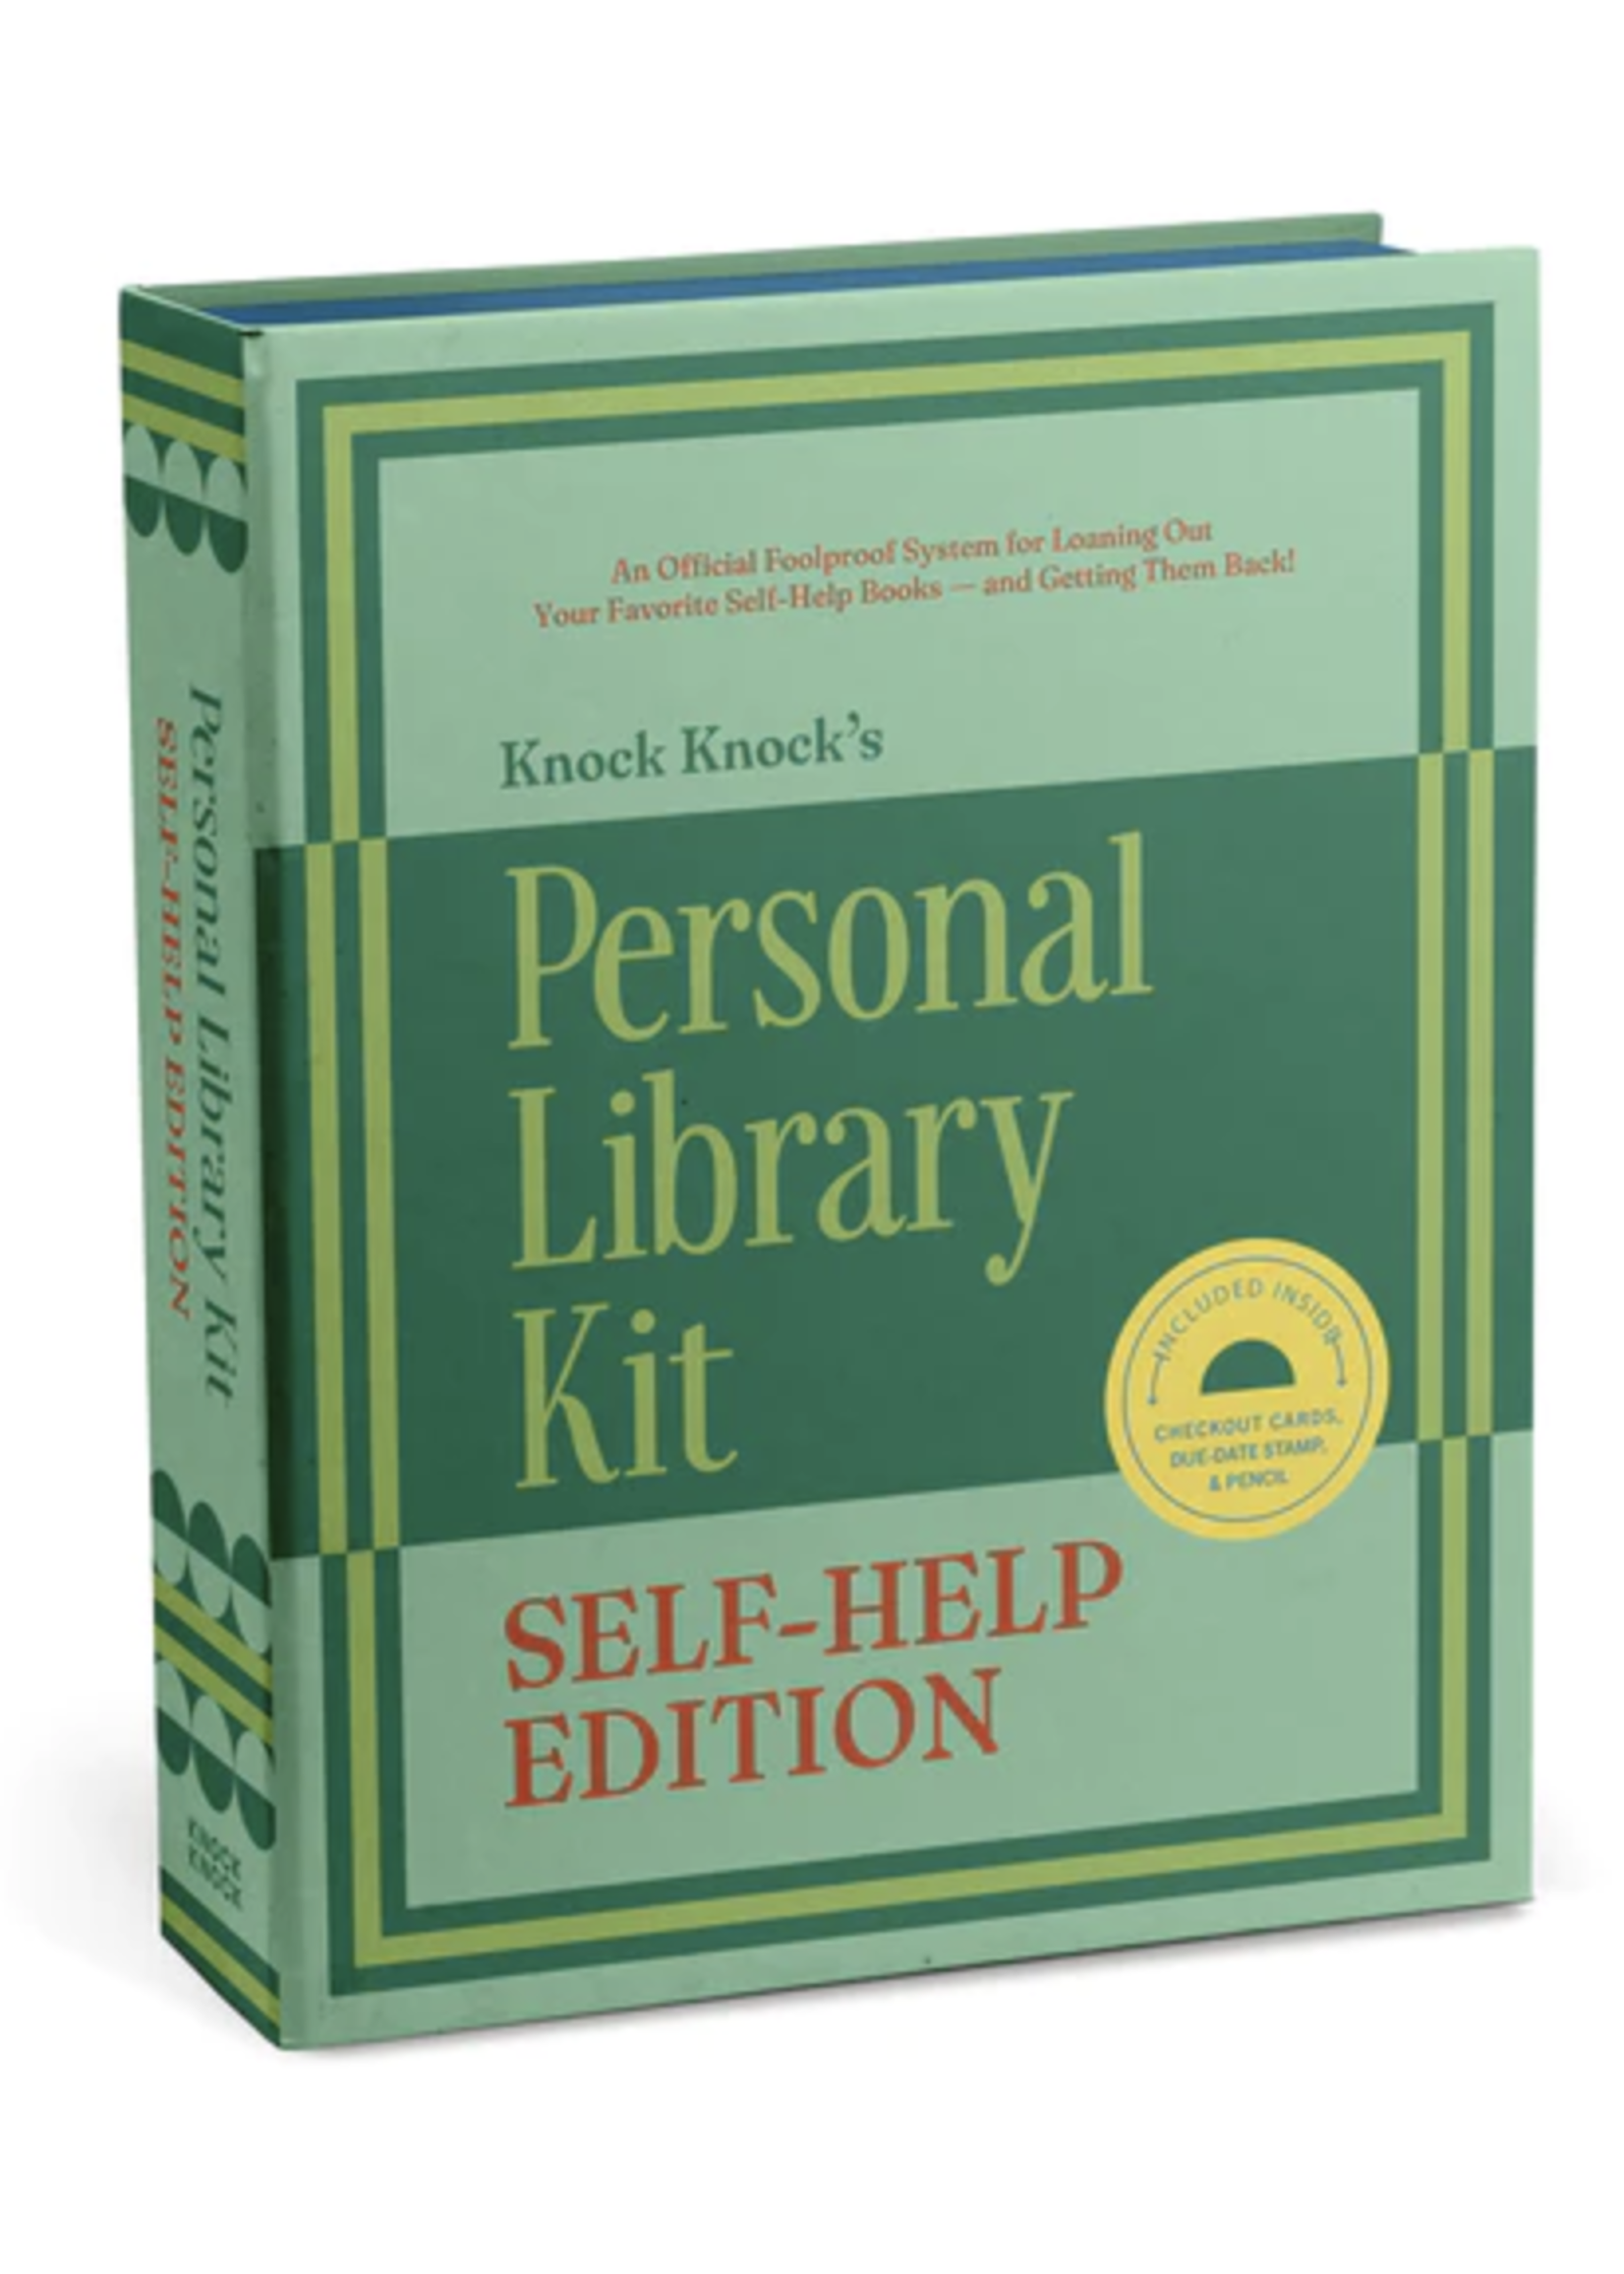 Knock Knock Personal Library Kit Self-Help Edition